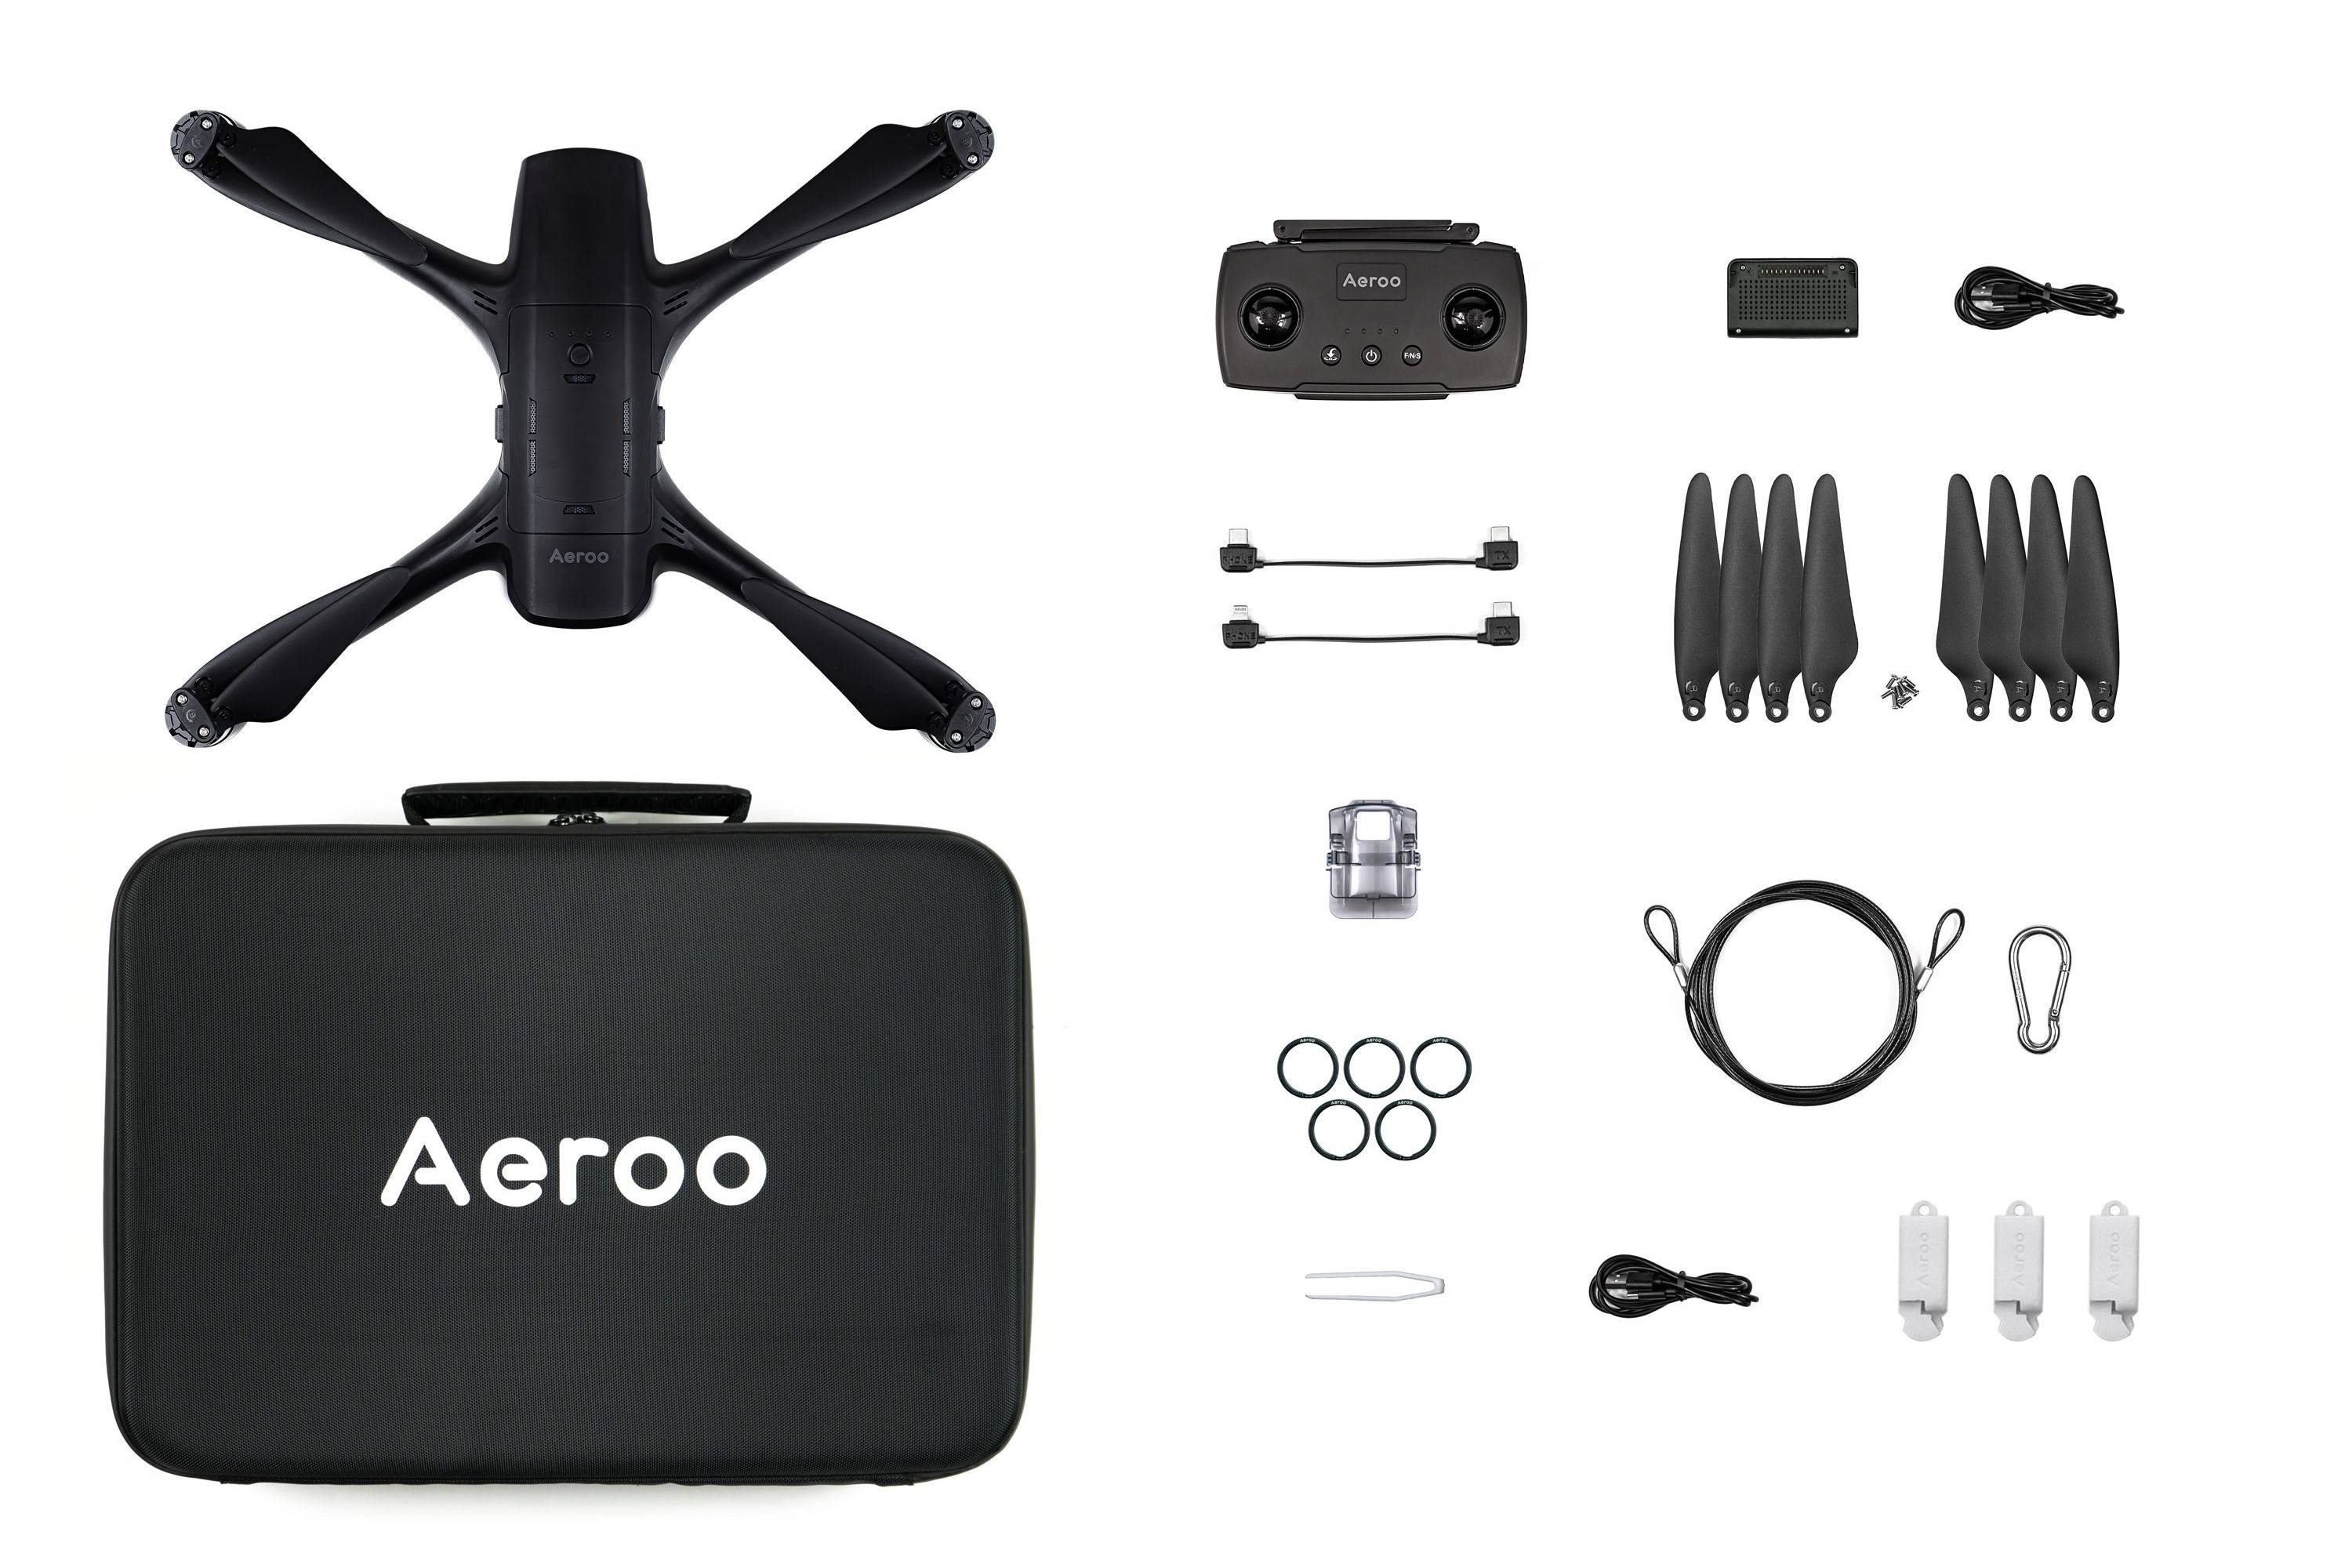 Aeroo Pro standard kit that includes a drone with essential accessories.